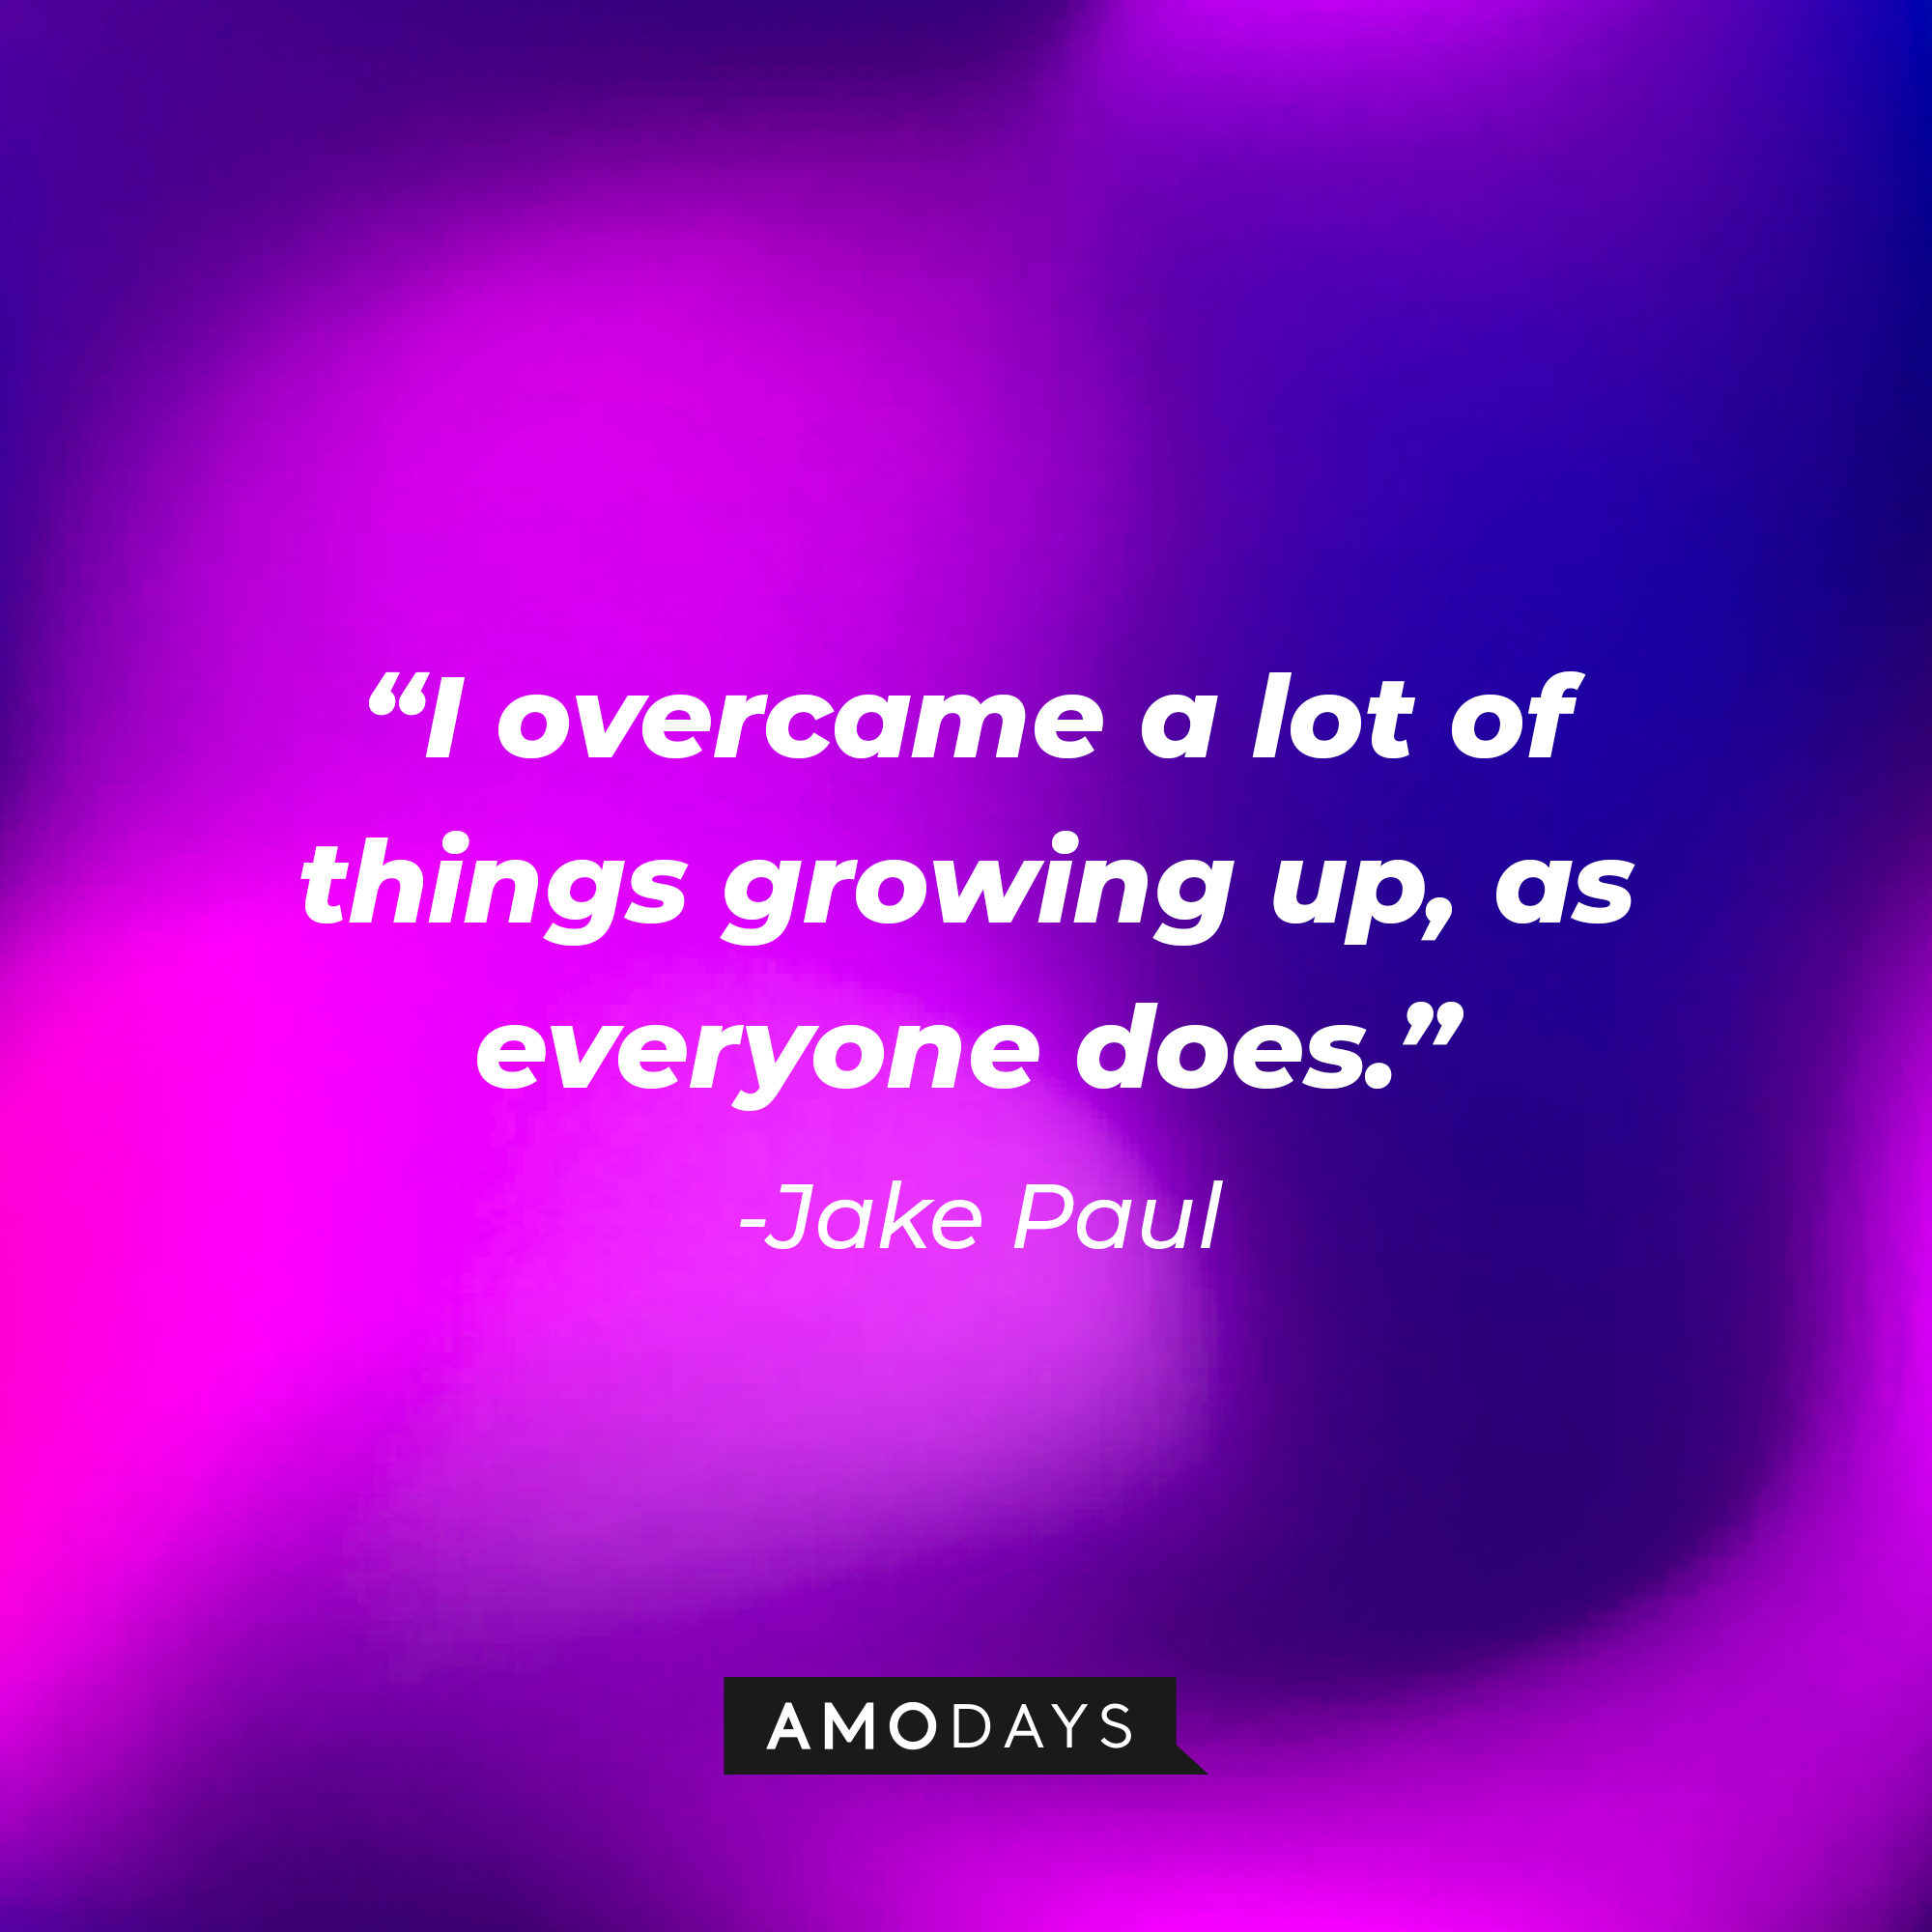 Jake Paul’s quote: "I overcame a lot of things growing up, as everyone does." | Image: Amodays